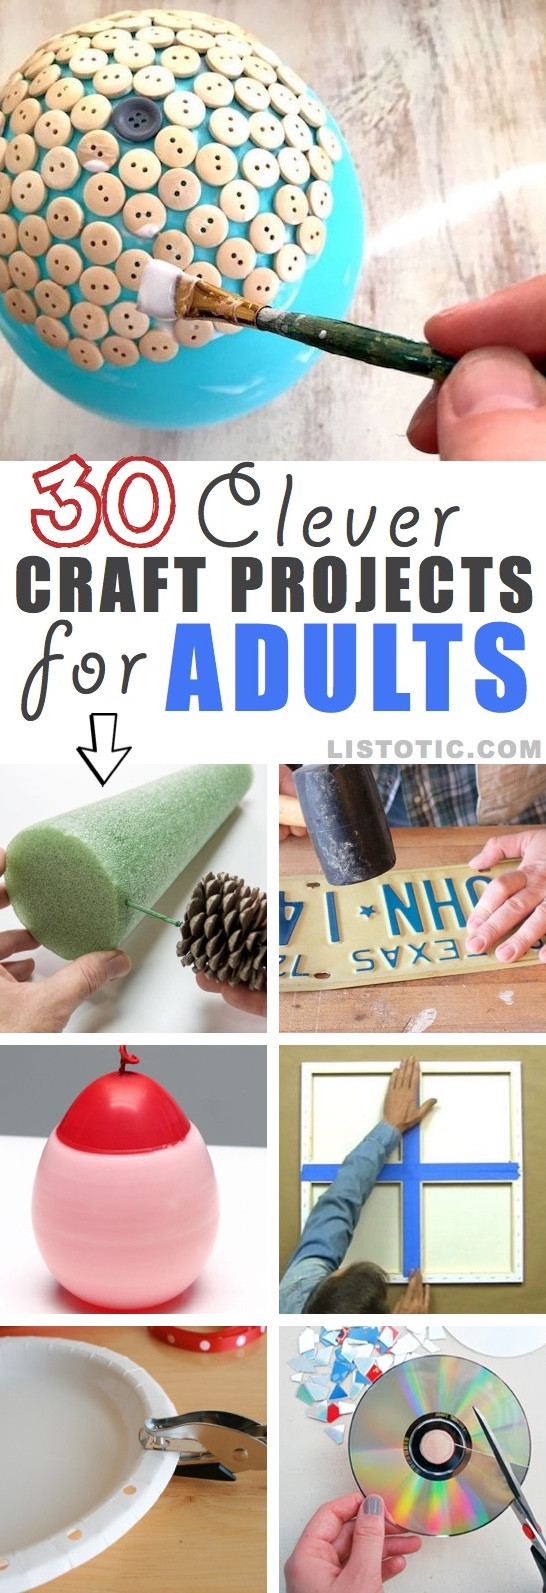 Adult Craft Projects
 Easy DIY Craft Ideas That Will Spark Your Creativity for